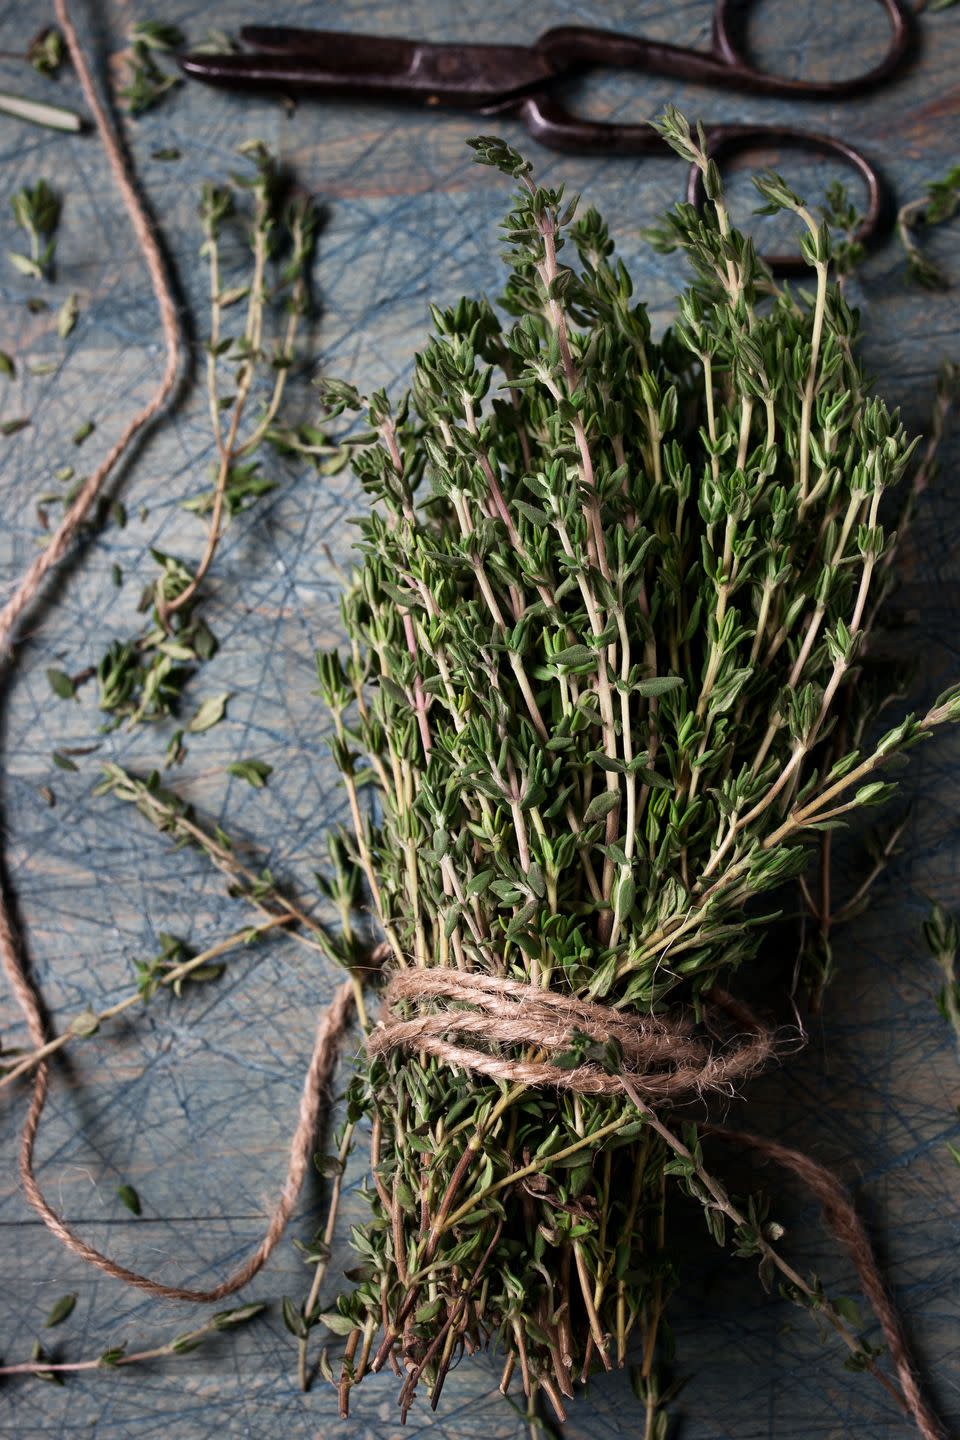 <p>'The more neglect the thyme plant experiences, the tastier it apparently is, so bad gardeners should opt for this herb,' says Chris. 'The plant will happily grow in poor soil whilst rarely getting watered. However, they will need mulching during frosty periods.'</p>